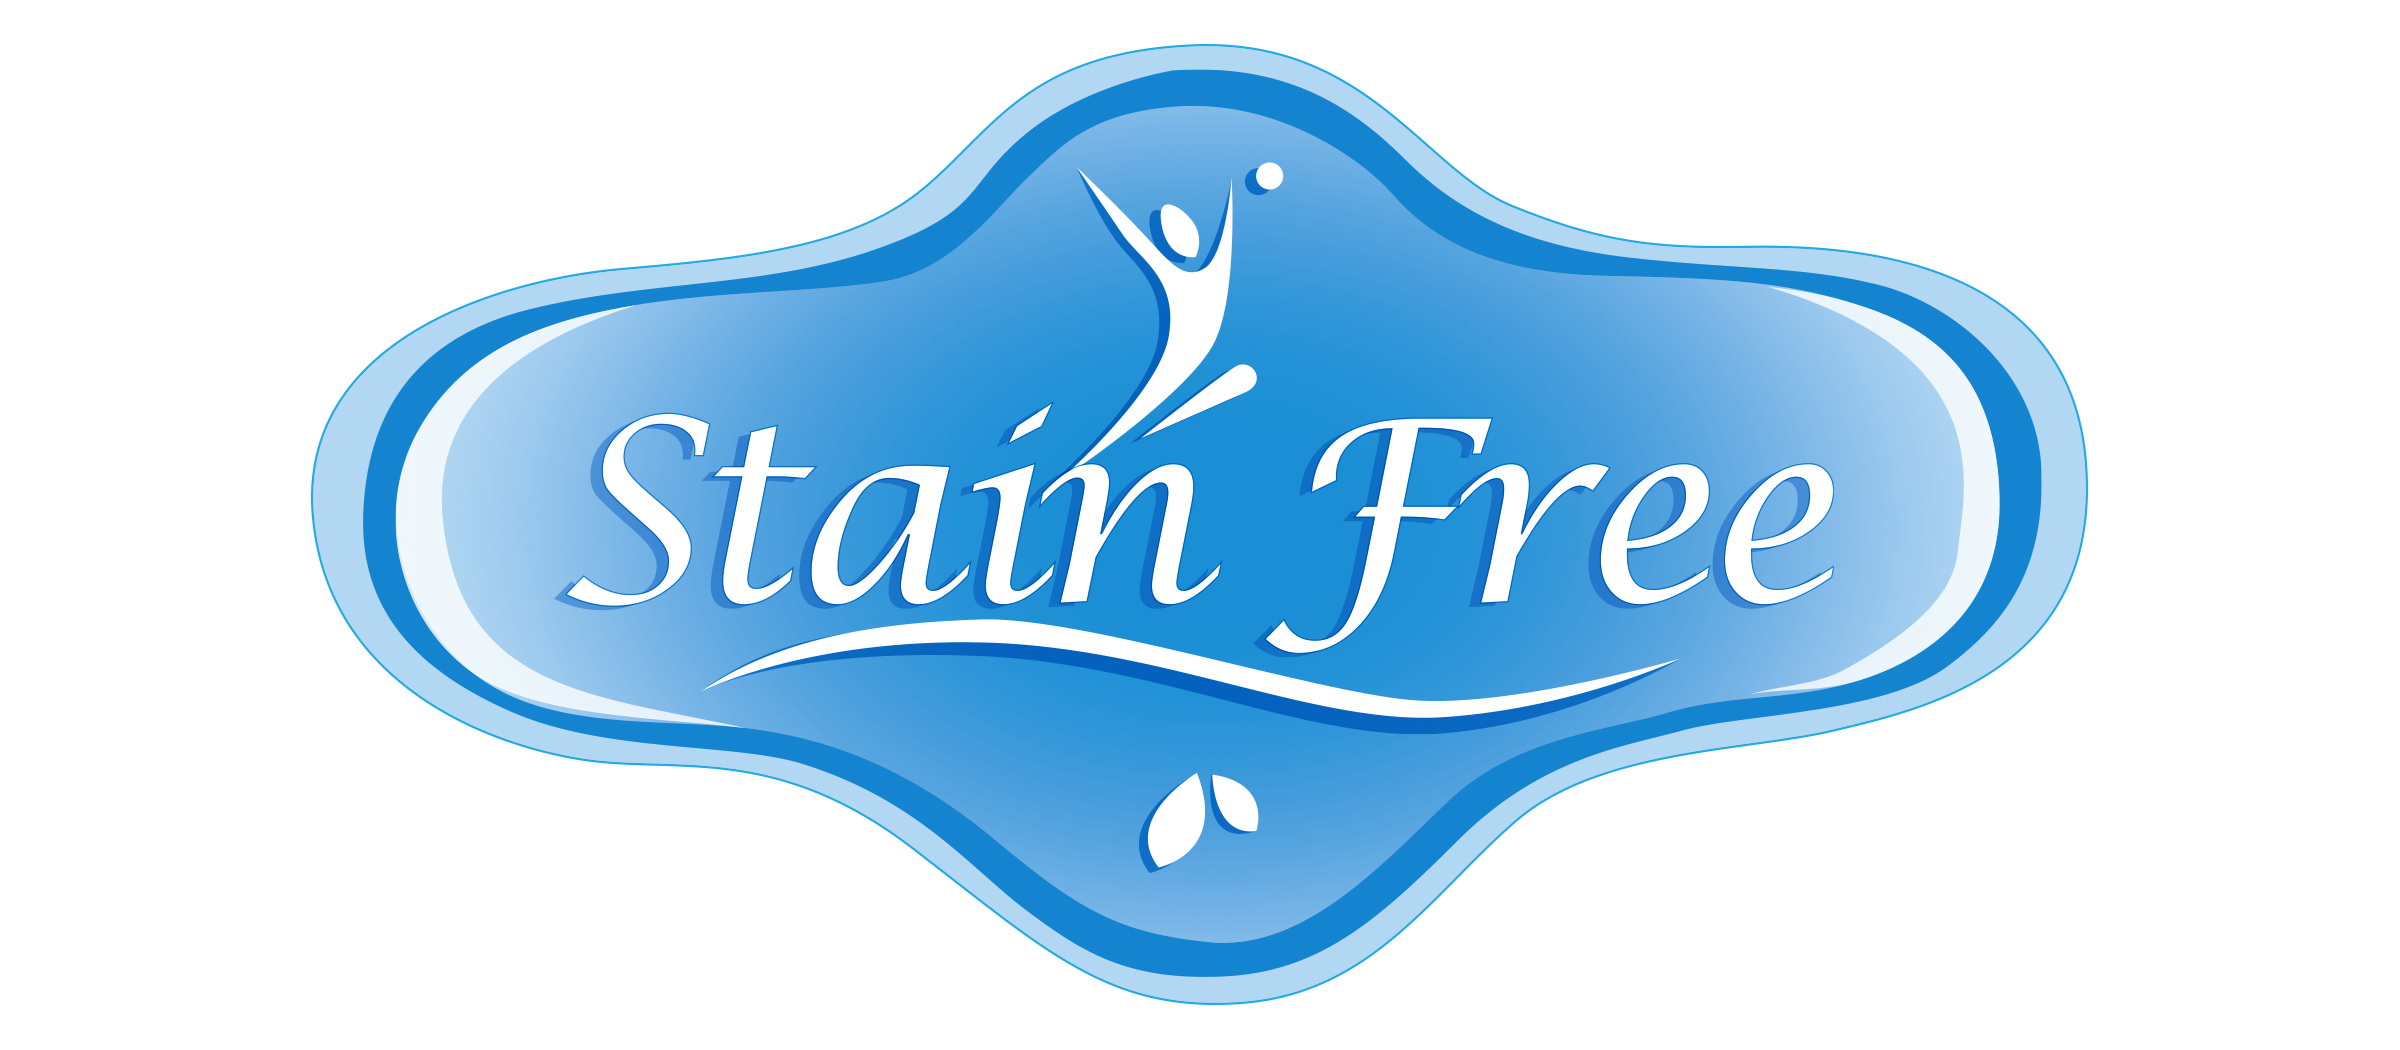 Make Stain Free your choice!